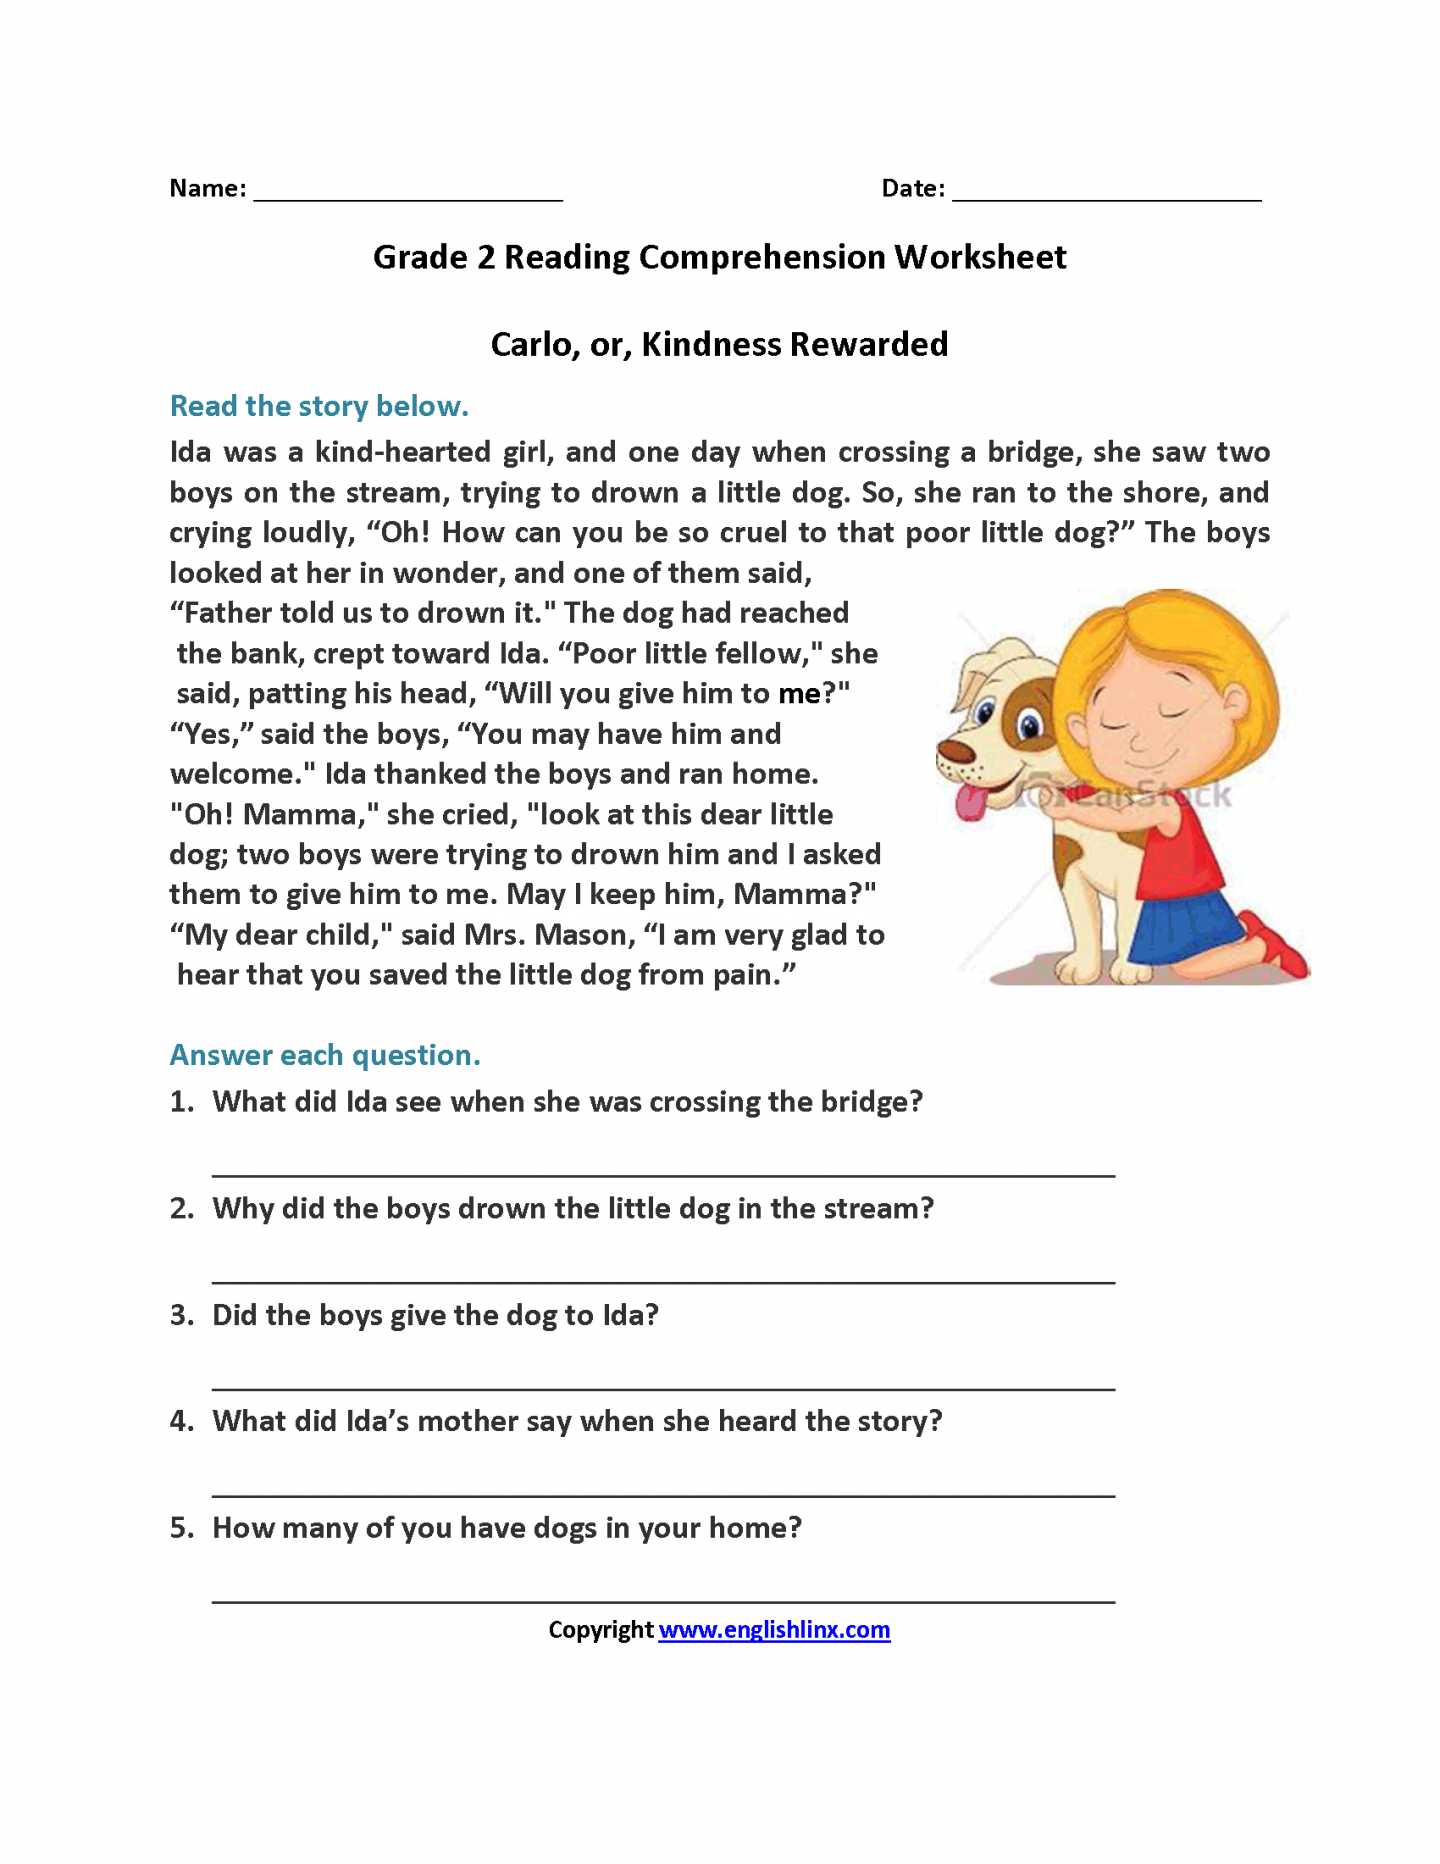 Reading Skills and Strategies Worksheet Animal Farm Also 2nd Grade Reading Prehension Worksheets Multiple Choice